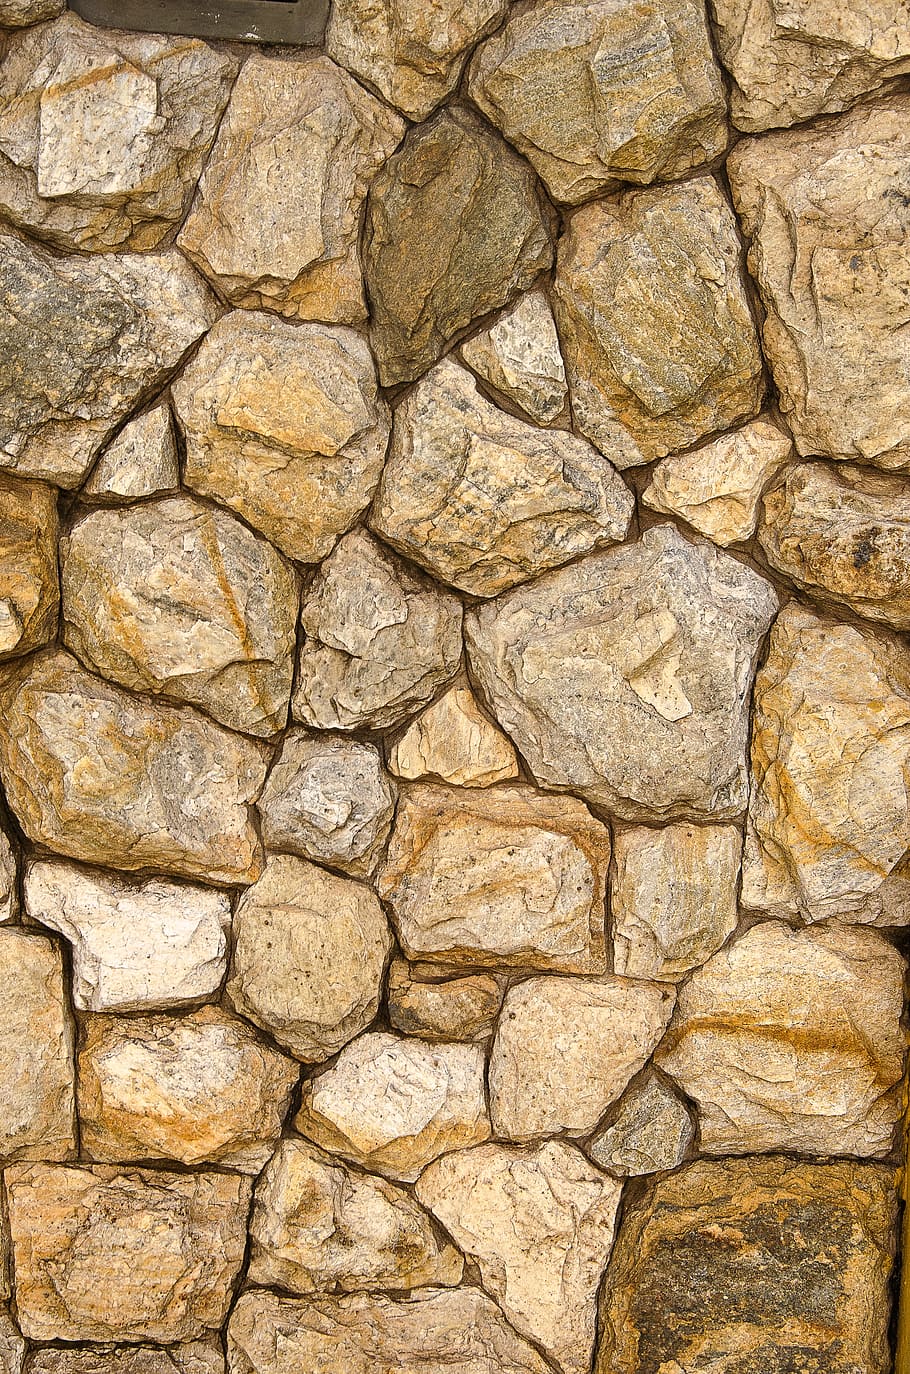 pile, rocks close-up photography, texture, stone, wall, stones, stone texture, full frame, backgrounds, stone wall